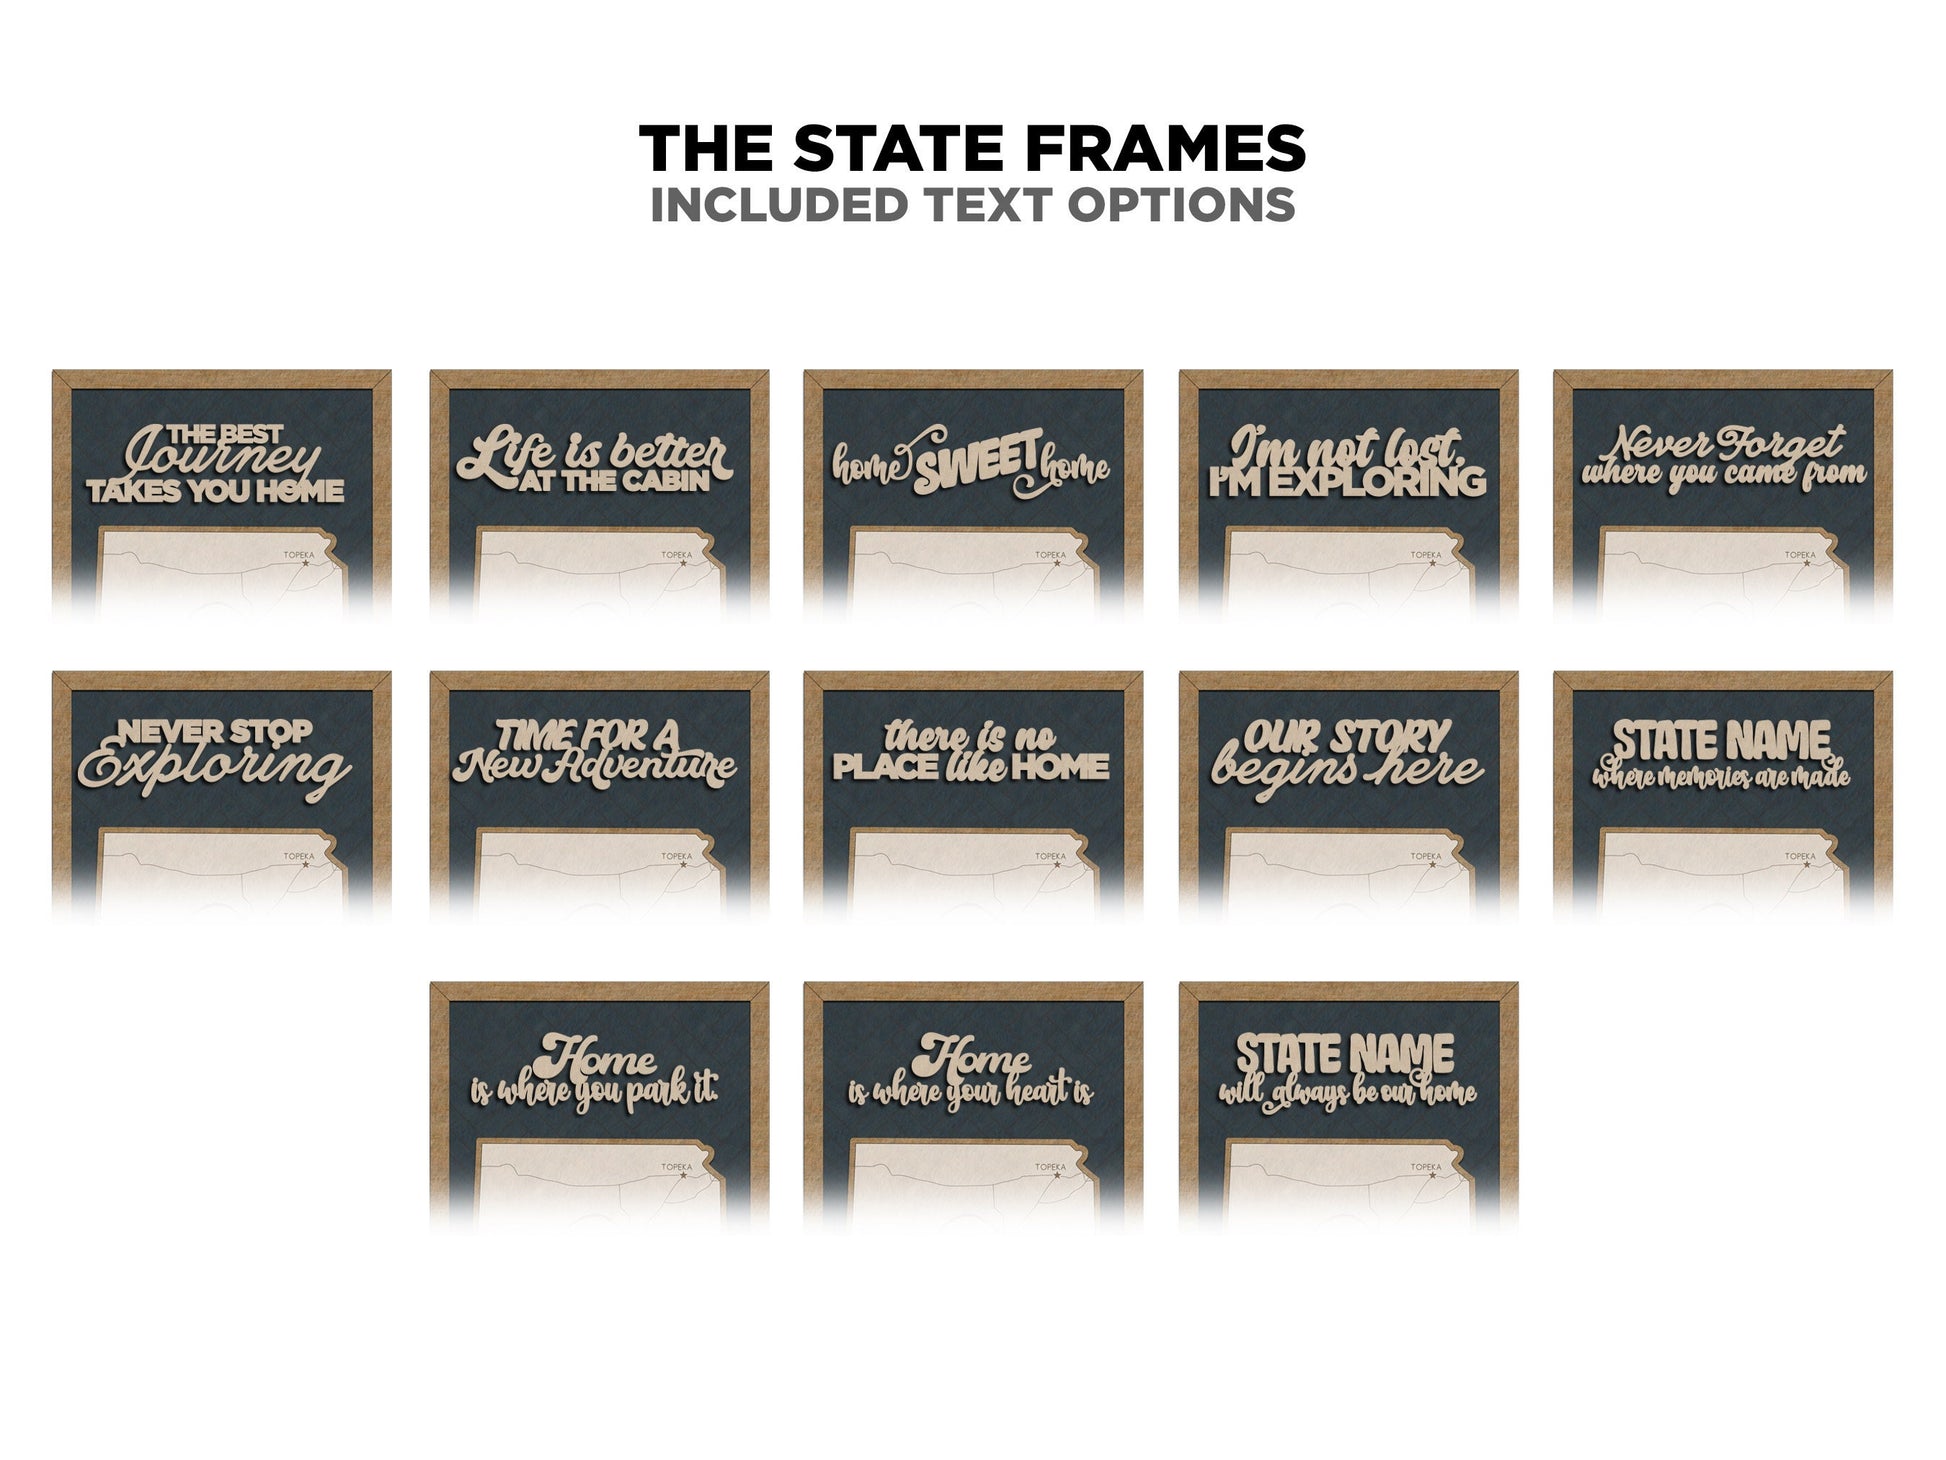 The Pennsylvania State Frame - 13 text options, 12 backgrounds, 25 icons Included - Make over 7,500 designs - Glowforge & Lightburn Tested